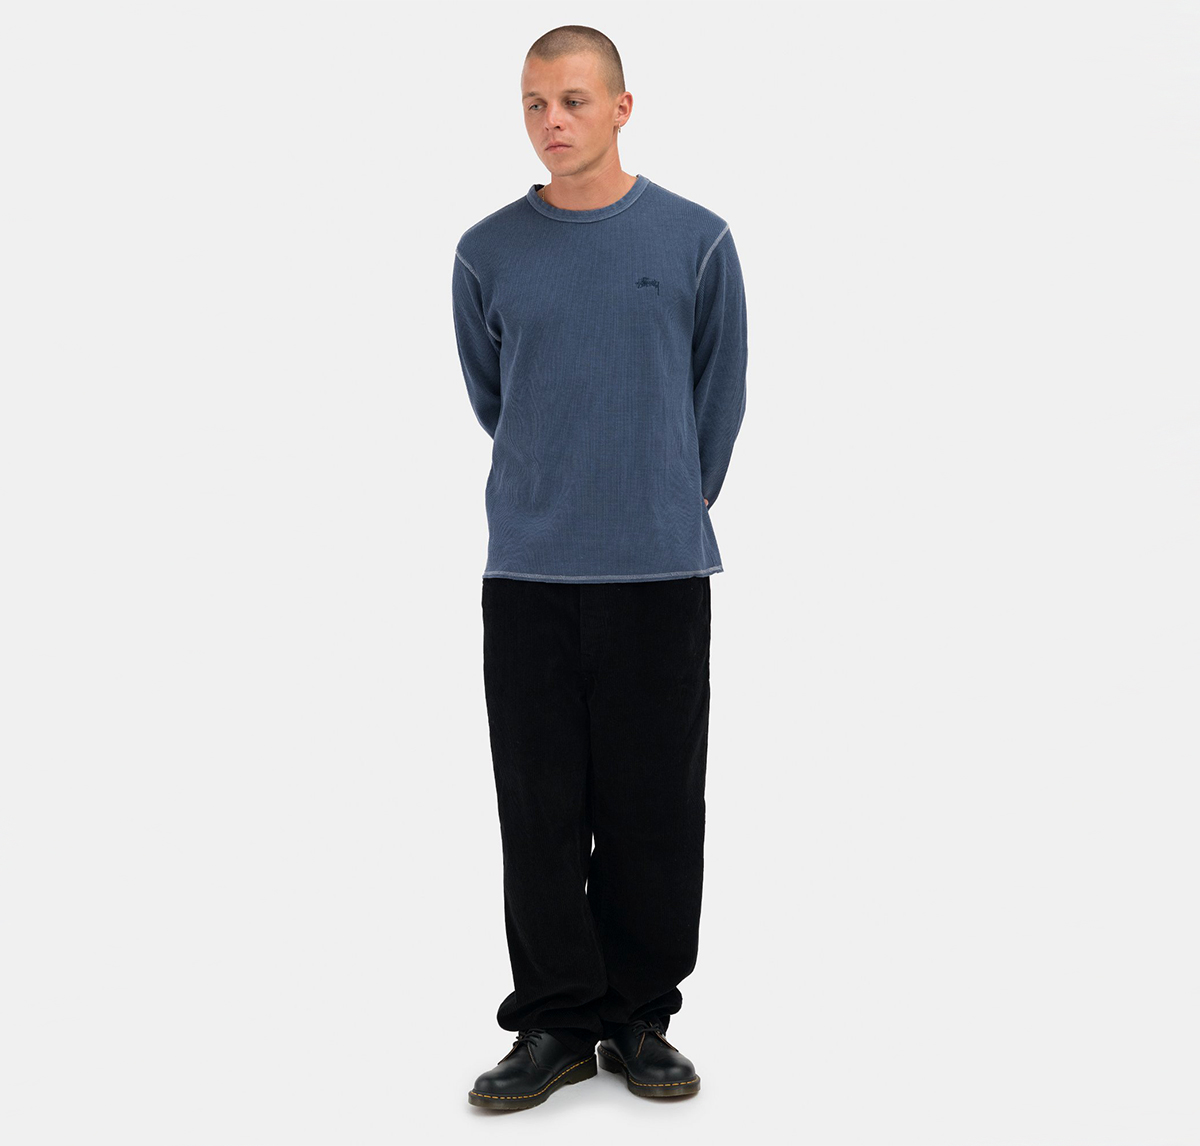 Stüssy Dyed Thermal - Navy outfit